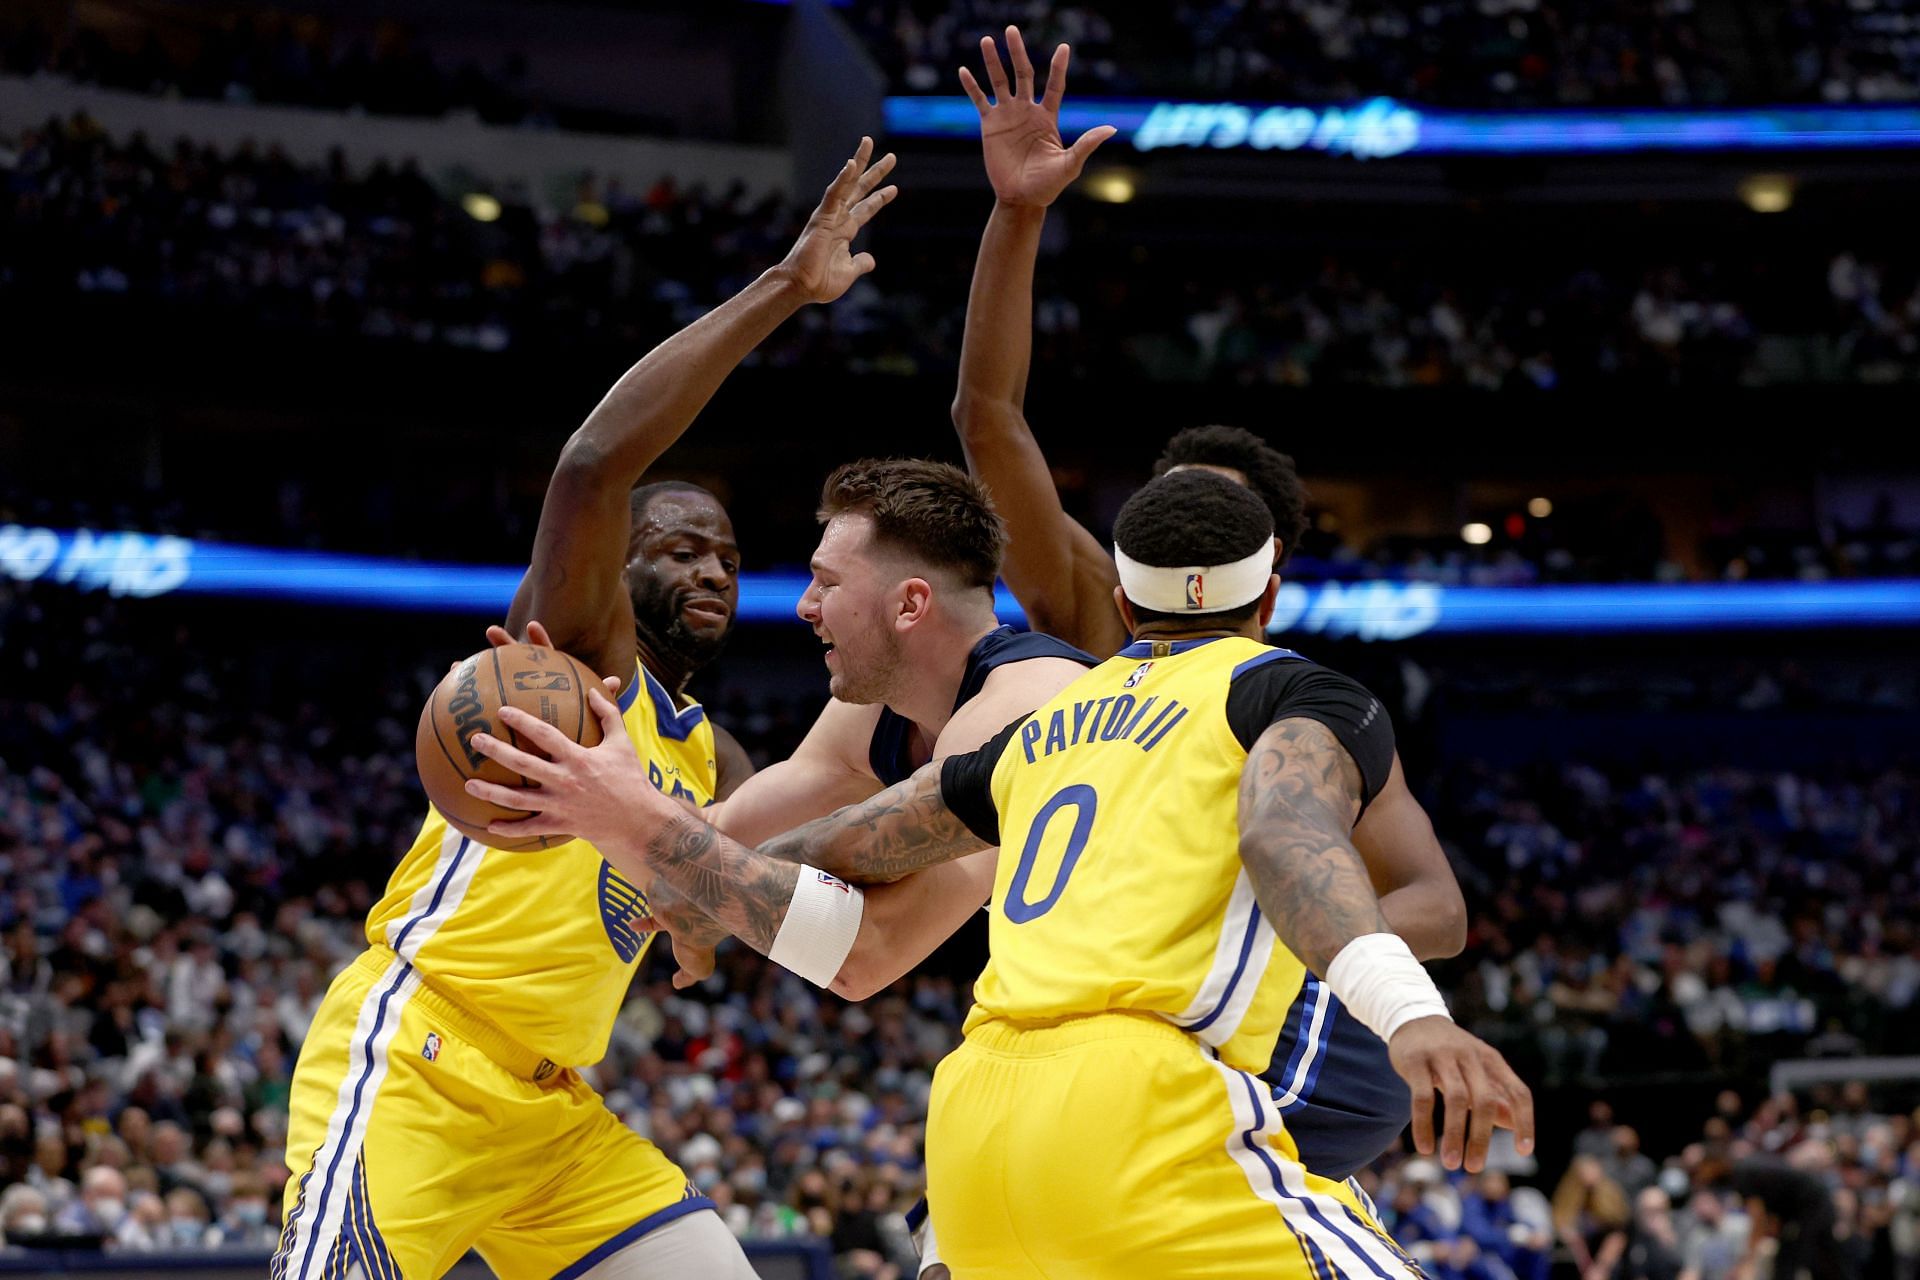 The Golden State Warriors will host the Dallas Mavericks on January 25th